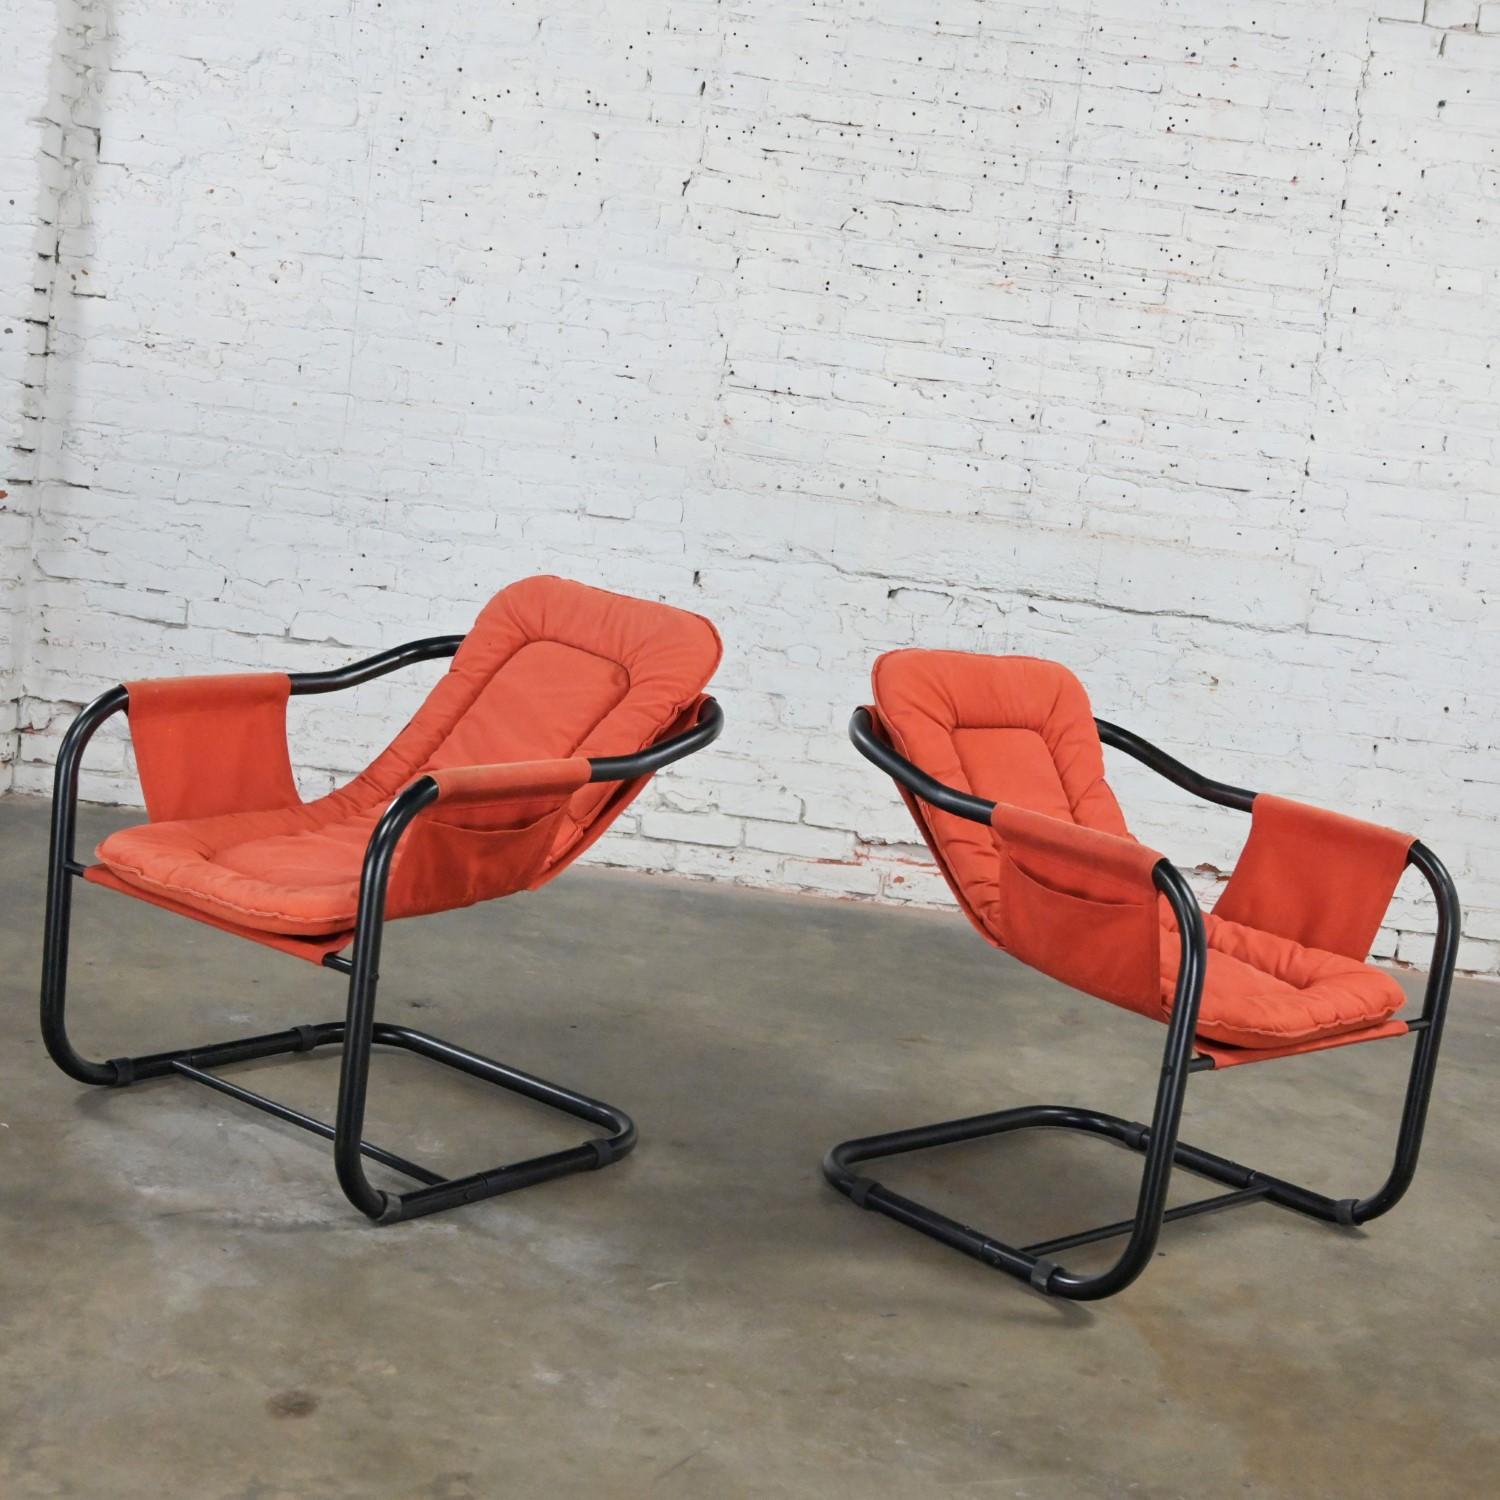 1970’s Modern Orange & Black Tube Cantilever Sling Lounge Chairs Jerry Johnson S For Sale 6